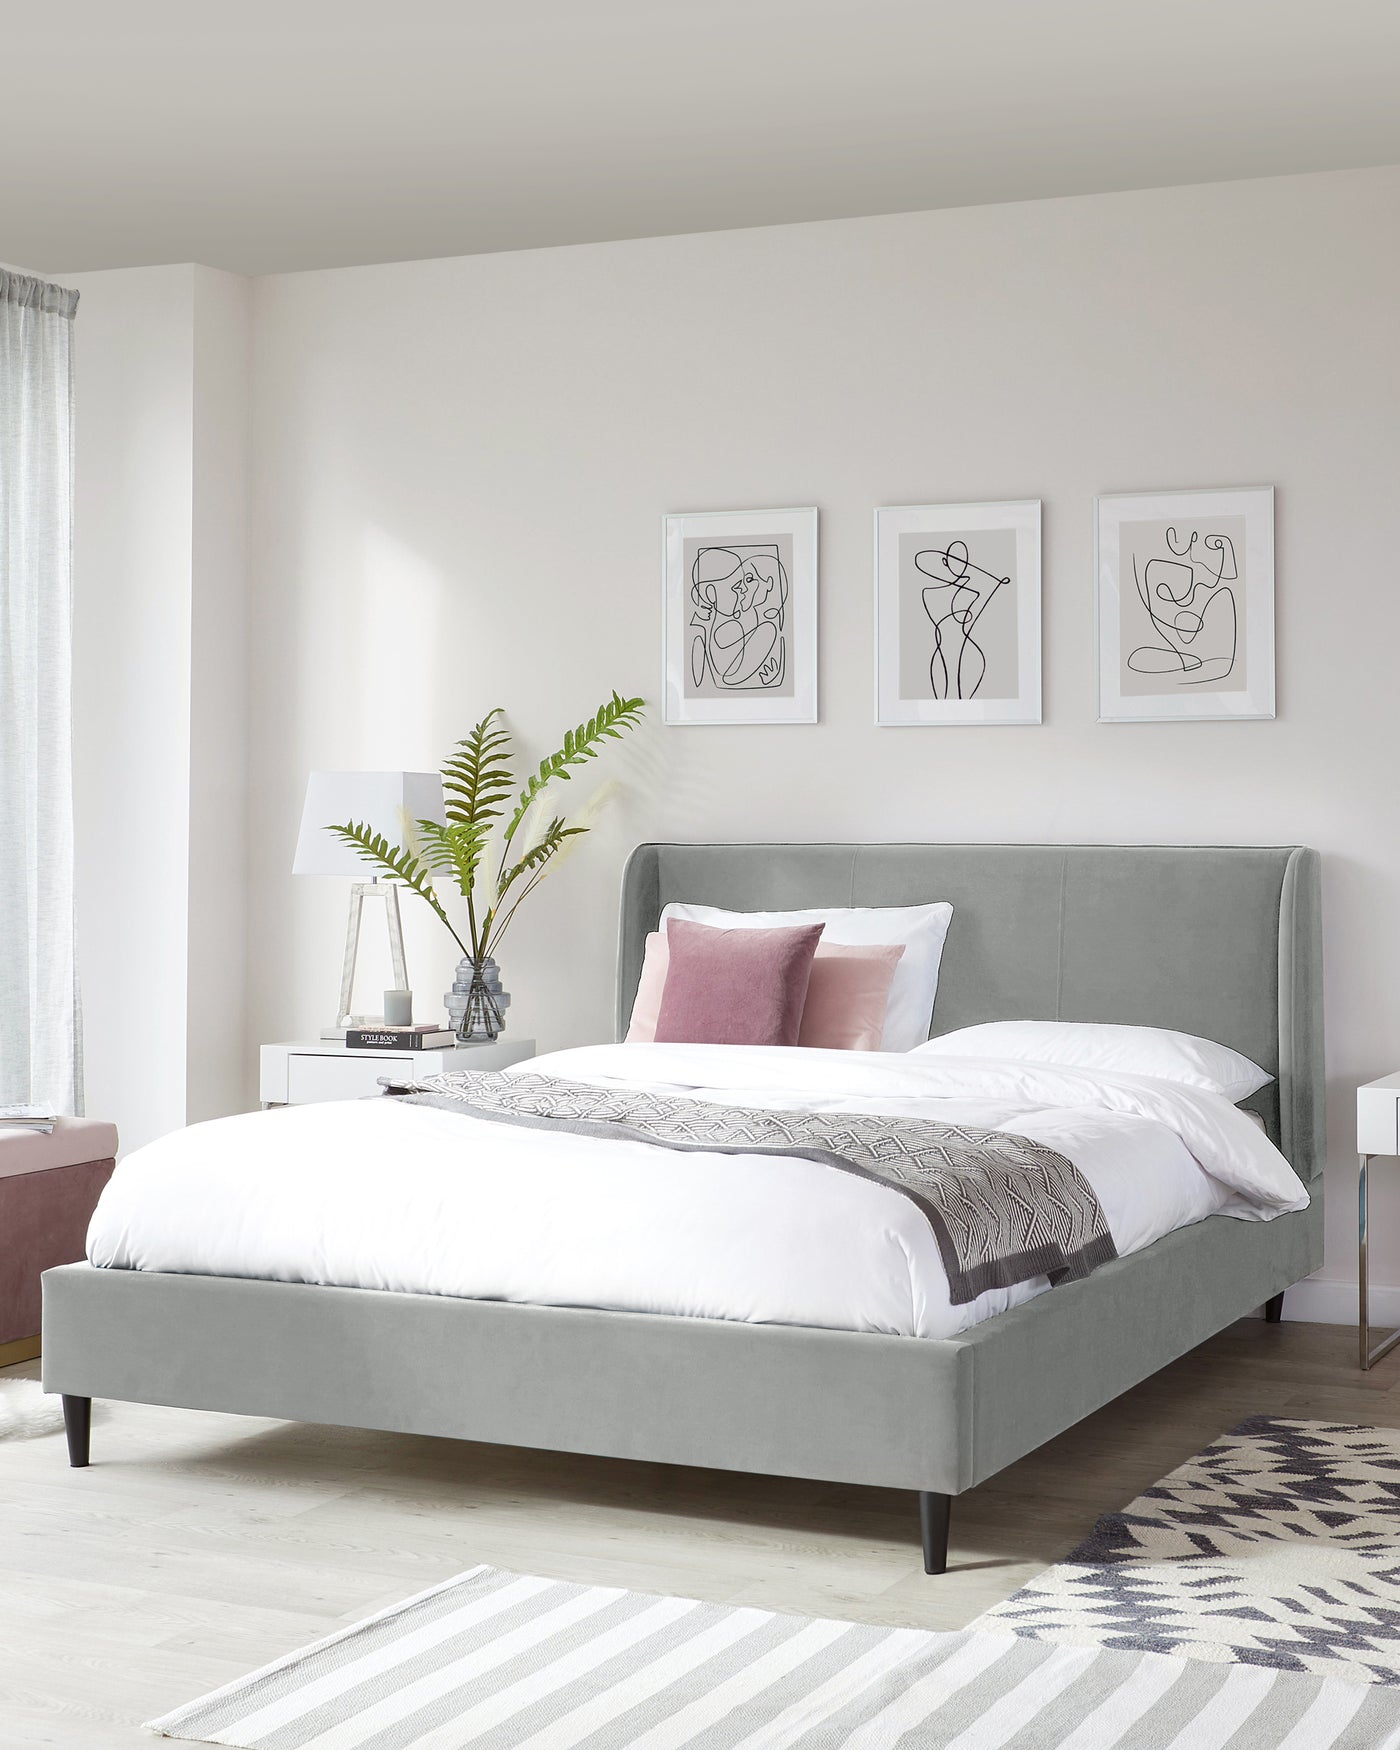 A modern upholstered queen-size platform bed in a light grey fabric with a high cushioned headboard, accompanied by a simple white nightstand with a glass vase and a table lamp, set against a neutral bedroom backdrop with minimalist decor.